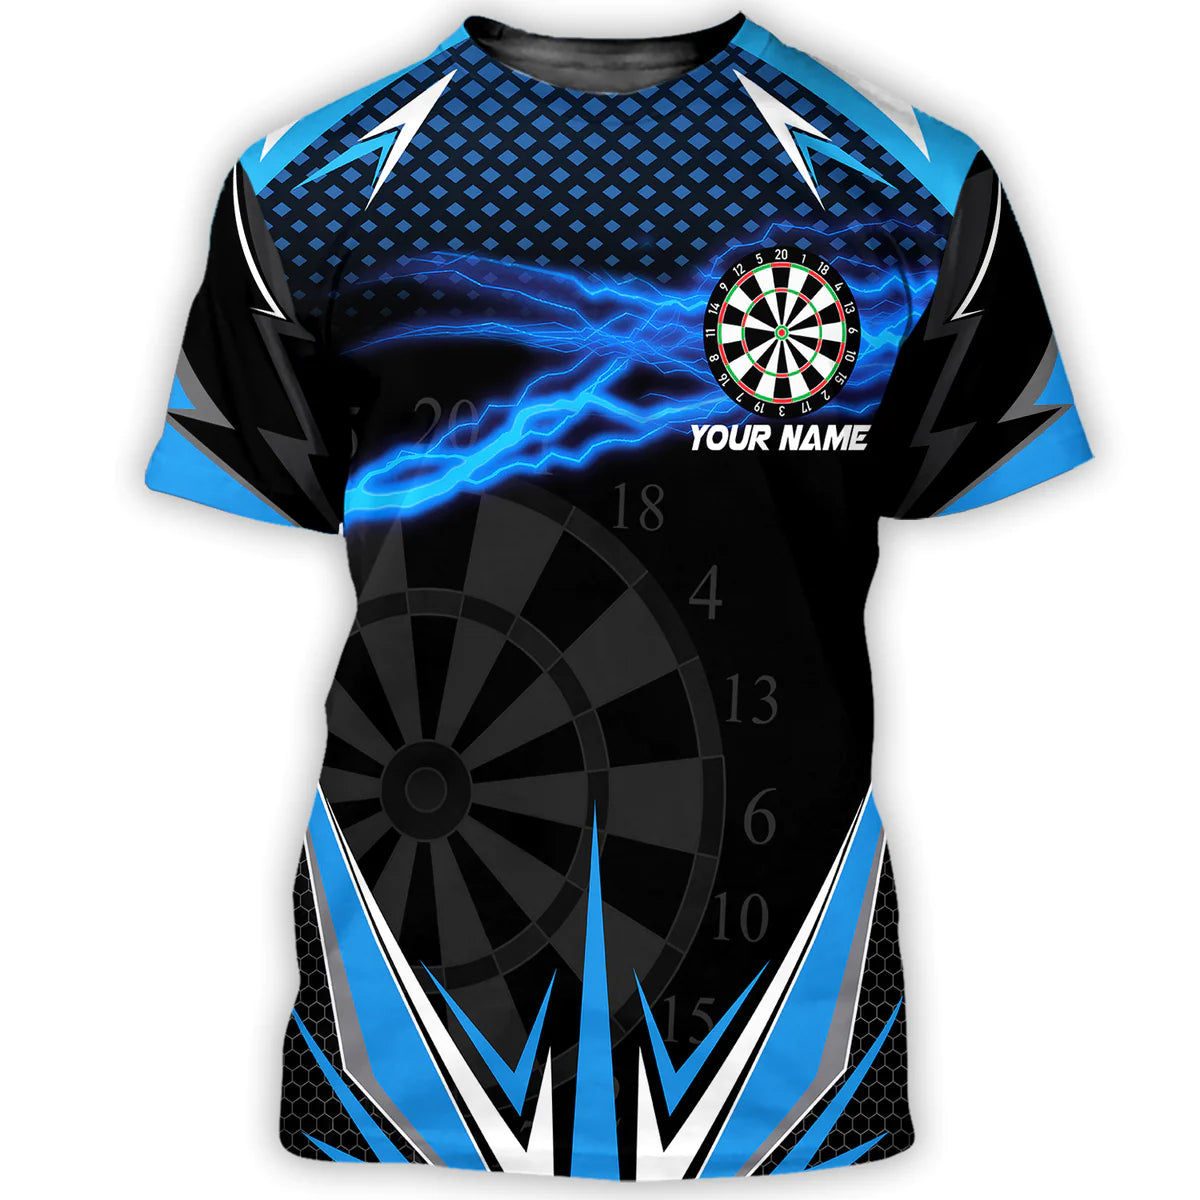 Personalized Name Darts Player All Over Printed Unisex Shirt, Dart Shirt, Gift To Dart Player – DT058